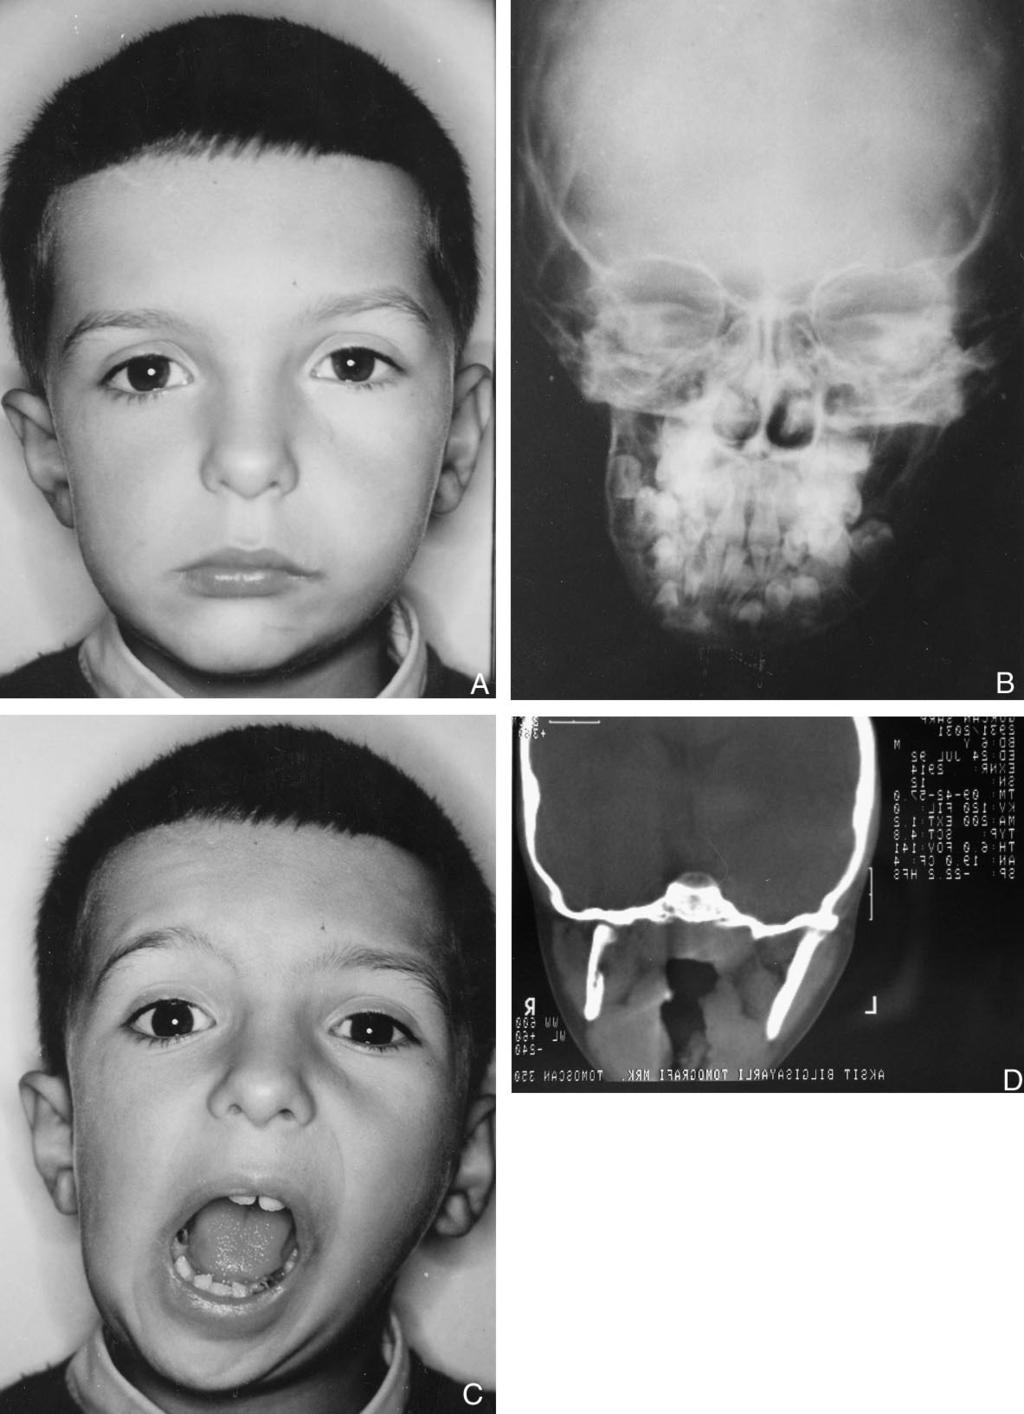 372 ARUN, KAYHAN, KIZILTAN FIGURE 1. Initial clinical photographic (A), radiographic (B), wide-open photographic (C), and tomographic (D) record of the patient.